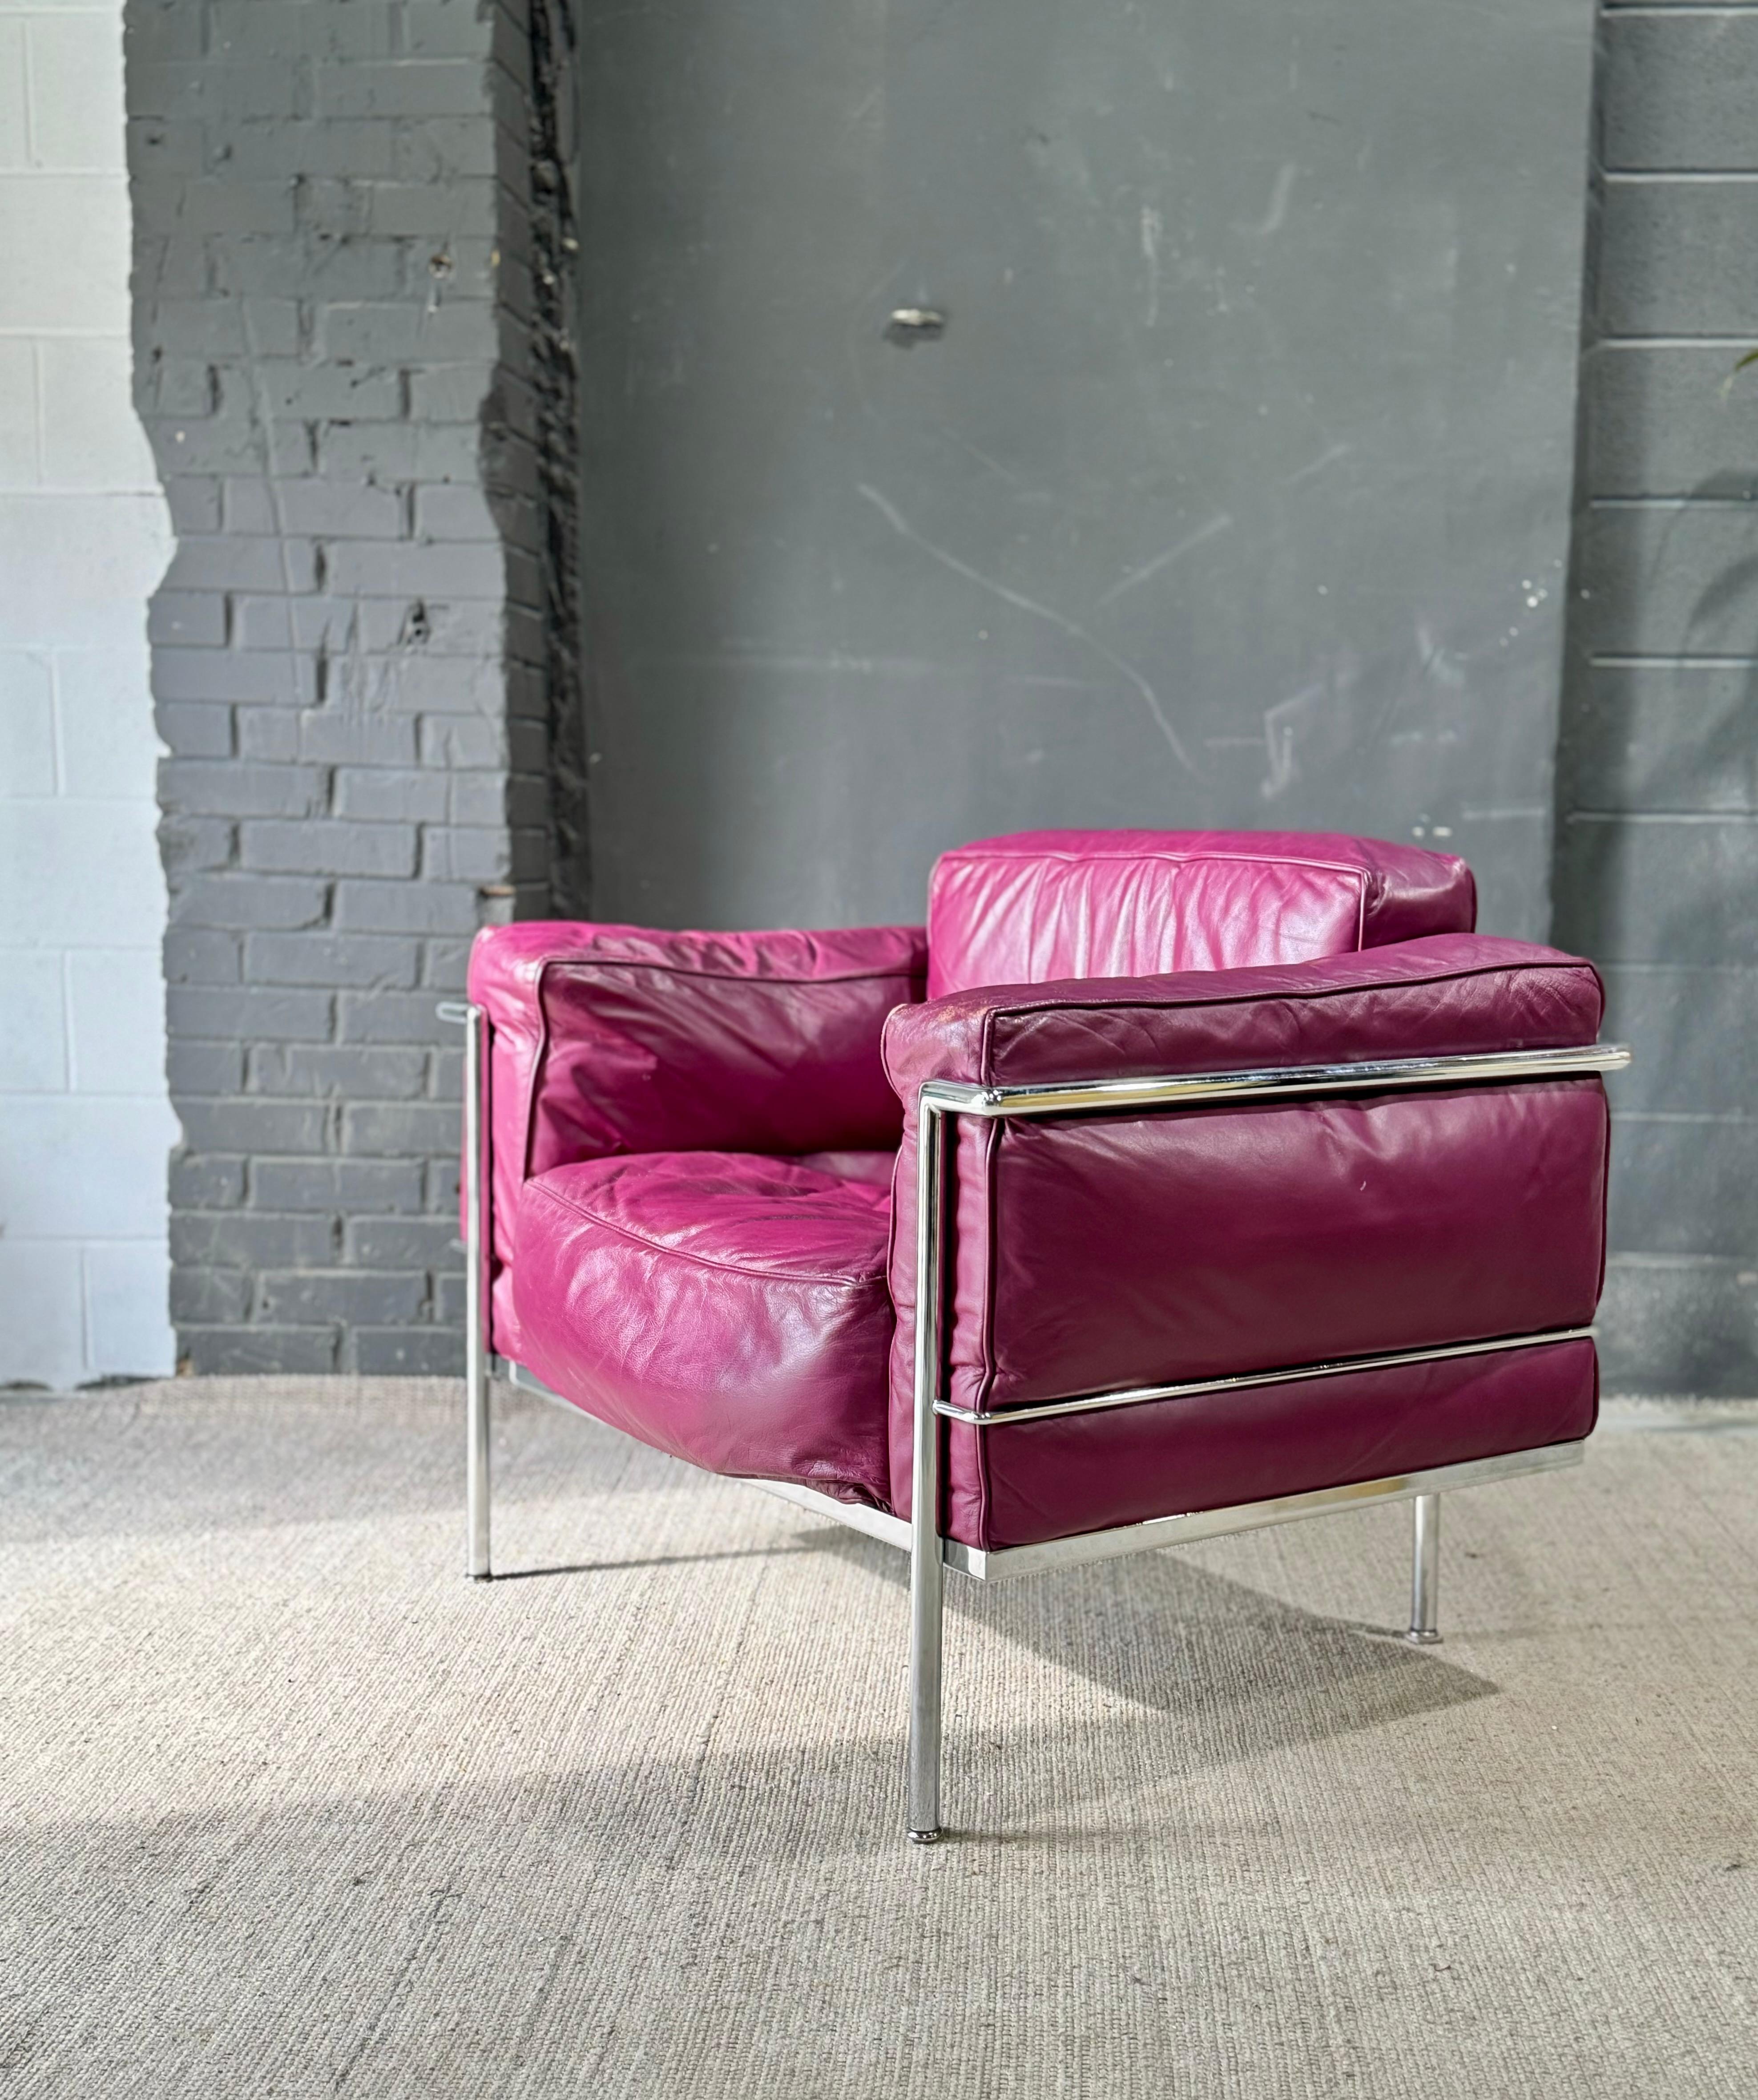 Le Corbusier LC3 “Grand Modele” style leather lounger. Absolutely impeccable to sit in. Unmatched comfort that can only be felt, not explained. 

Superb quality tubular chrome frame, adorned with top grain leather cushions. A magenta-coded colour